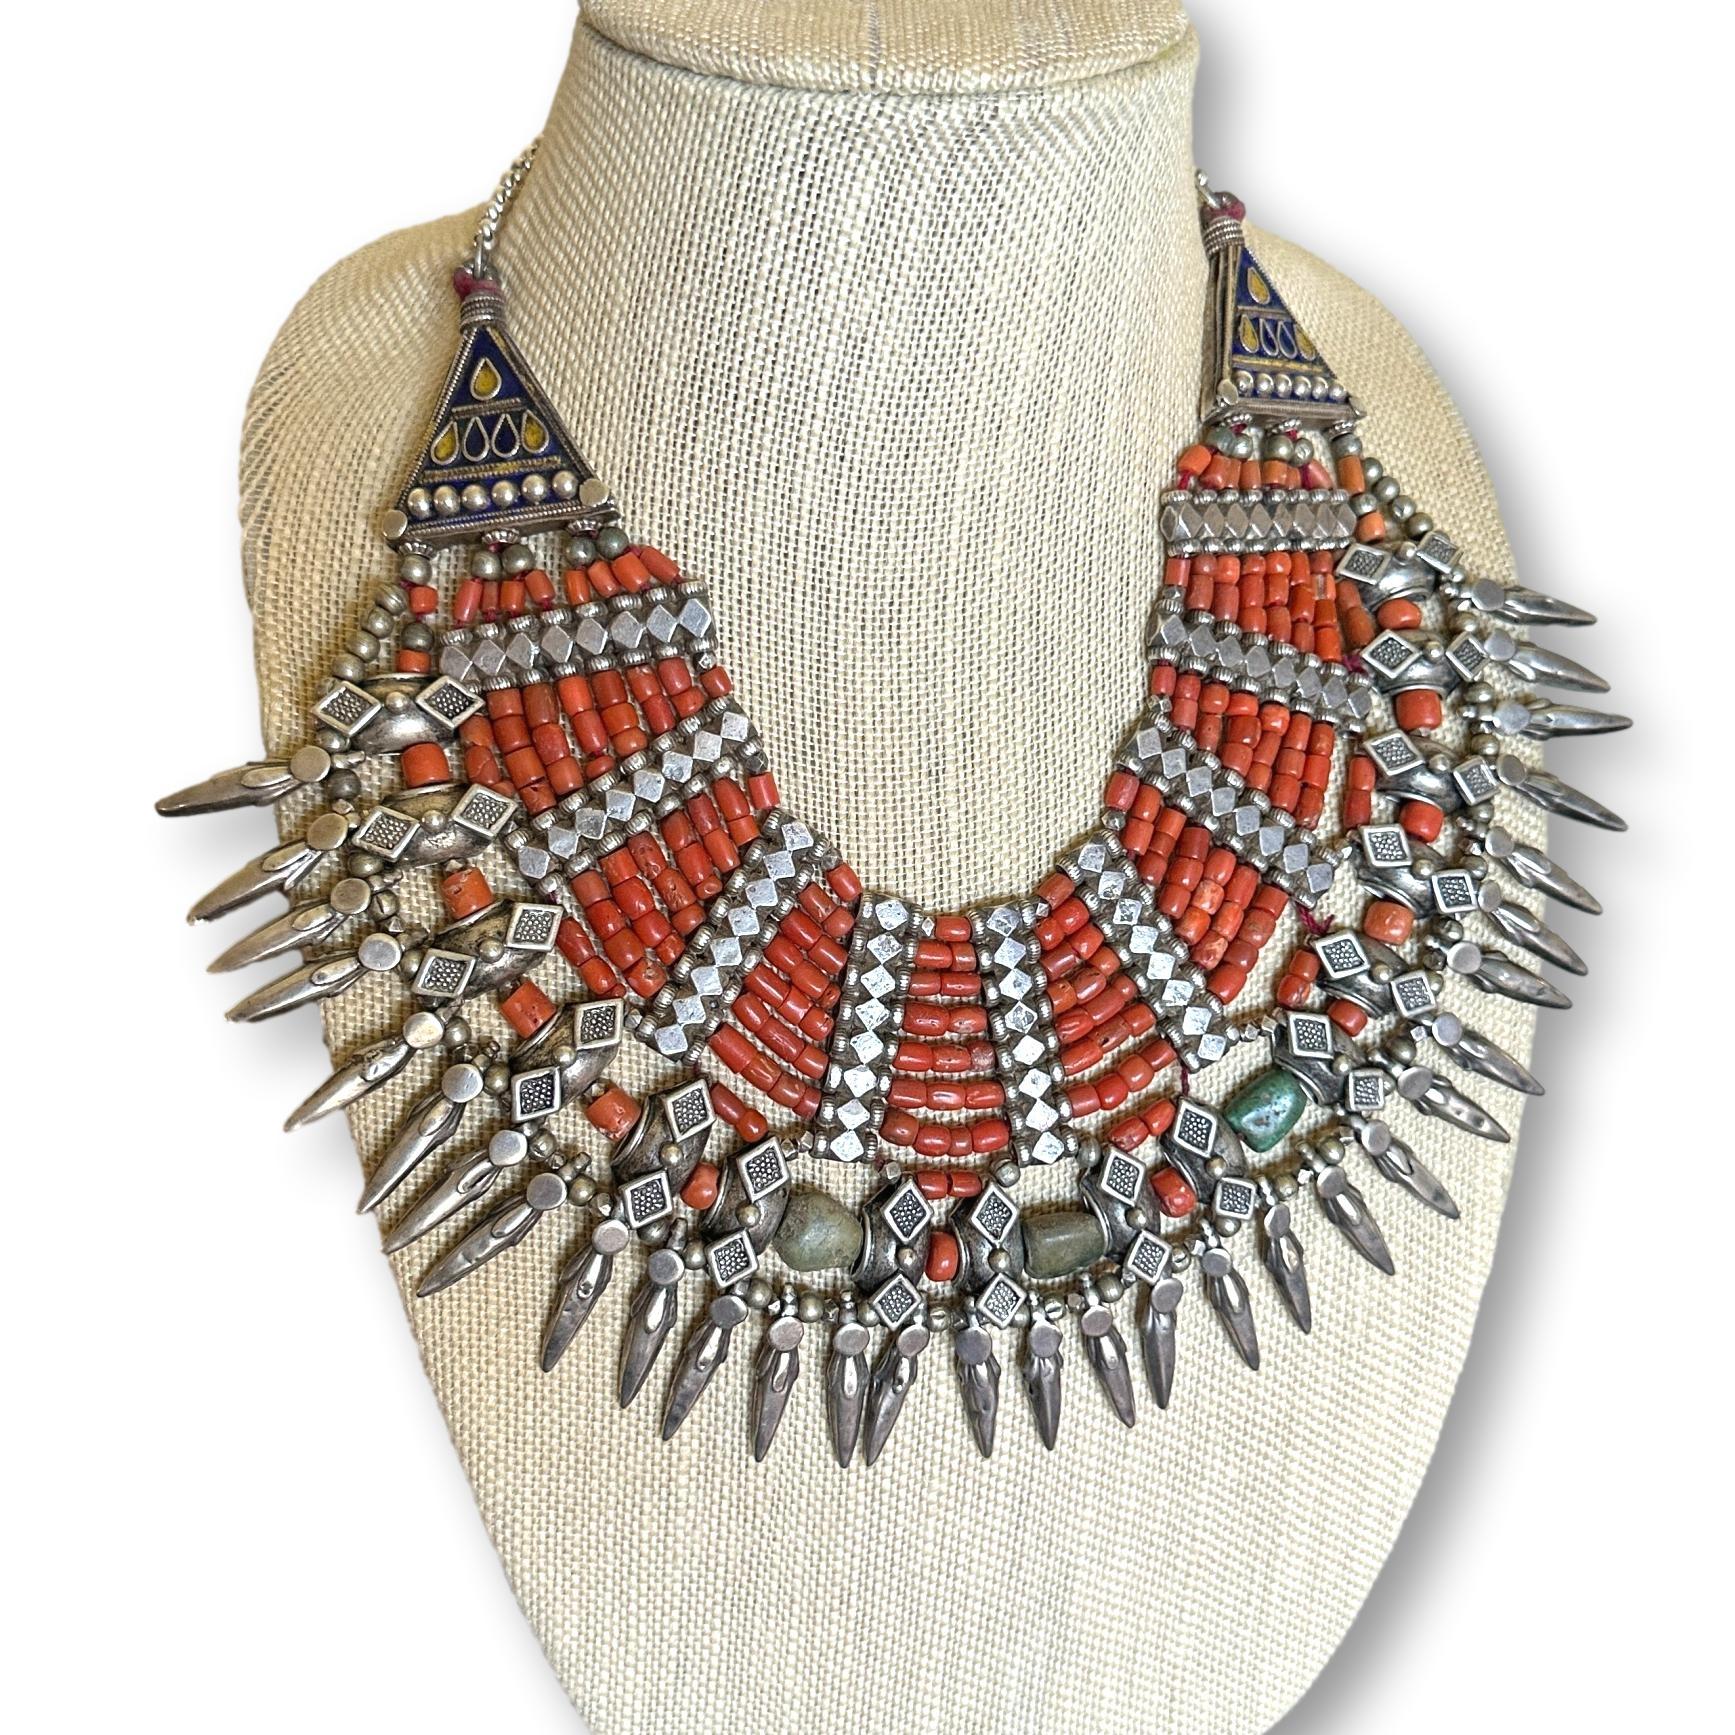 Vintage Tribal Coral and Silver Alloy Necklace